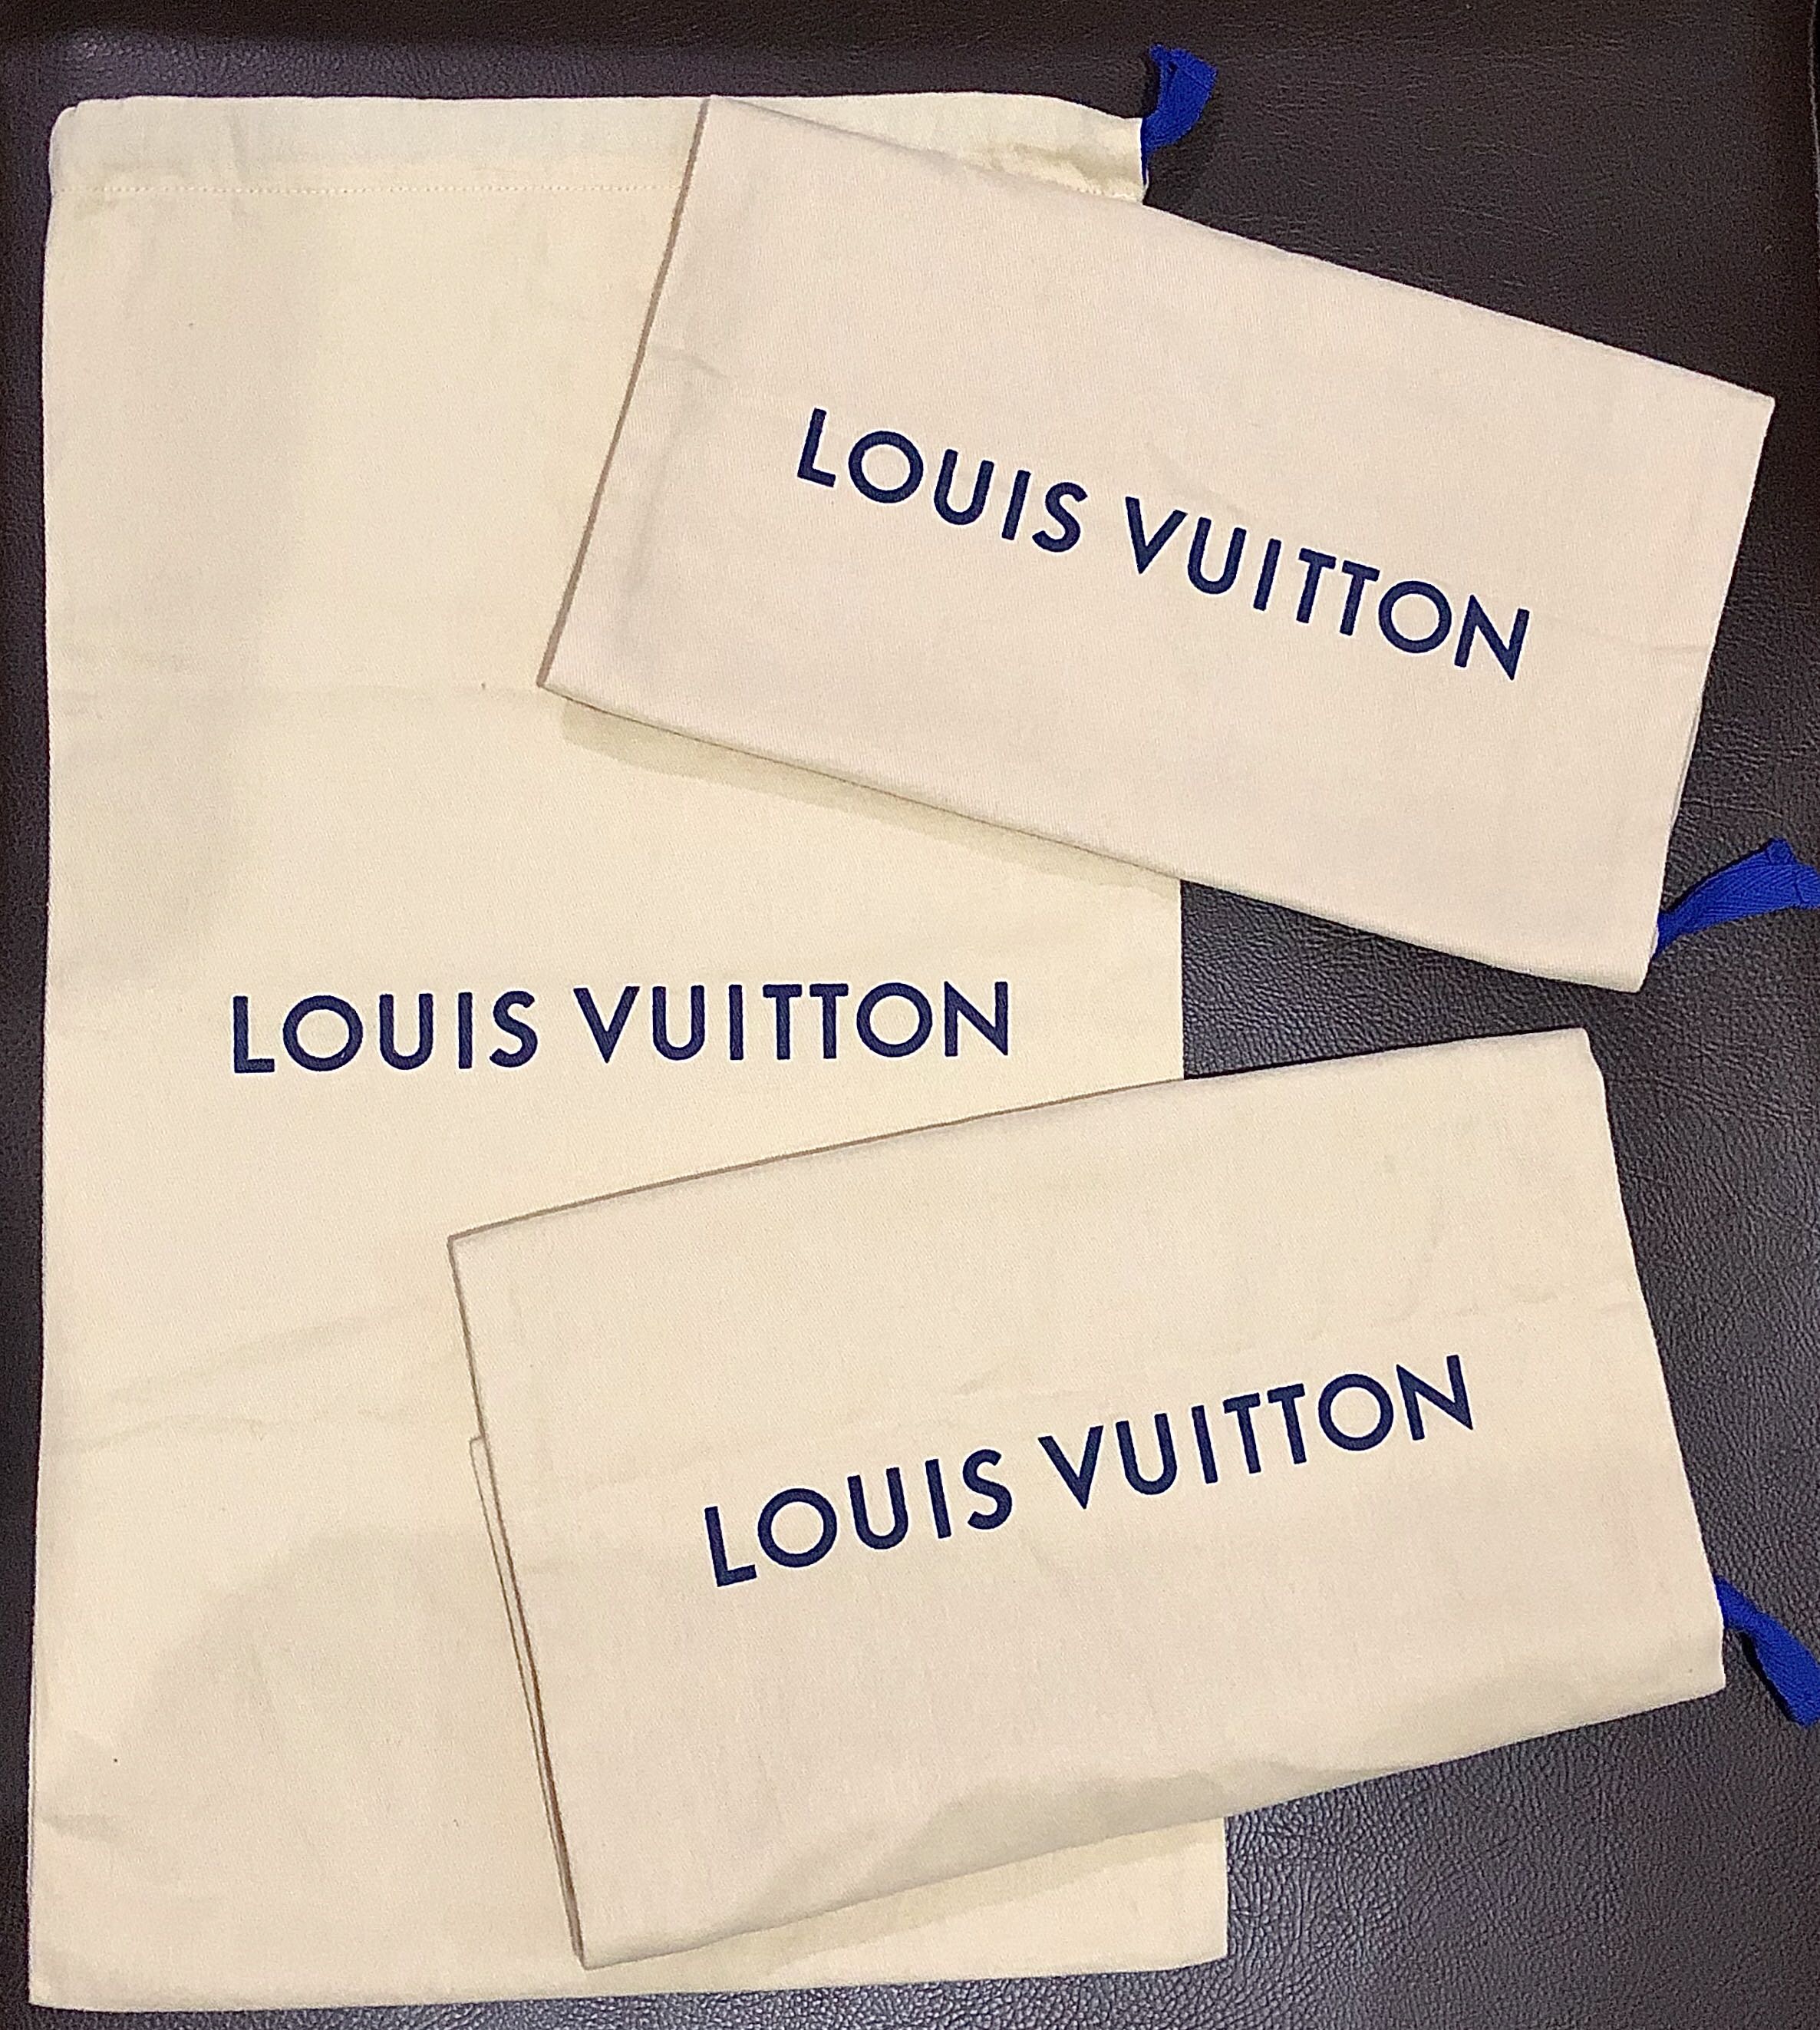 Remember this Louis Vuitton dust bag I repurposed into a Sling? I